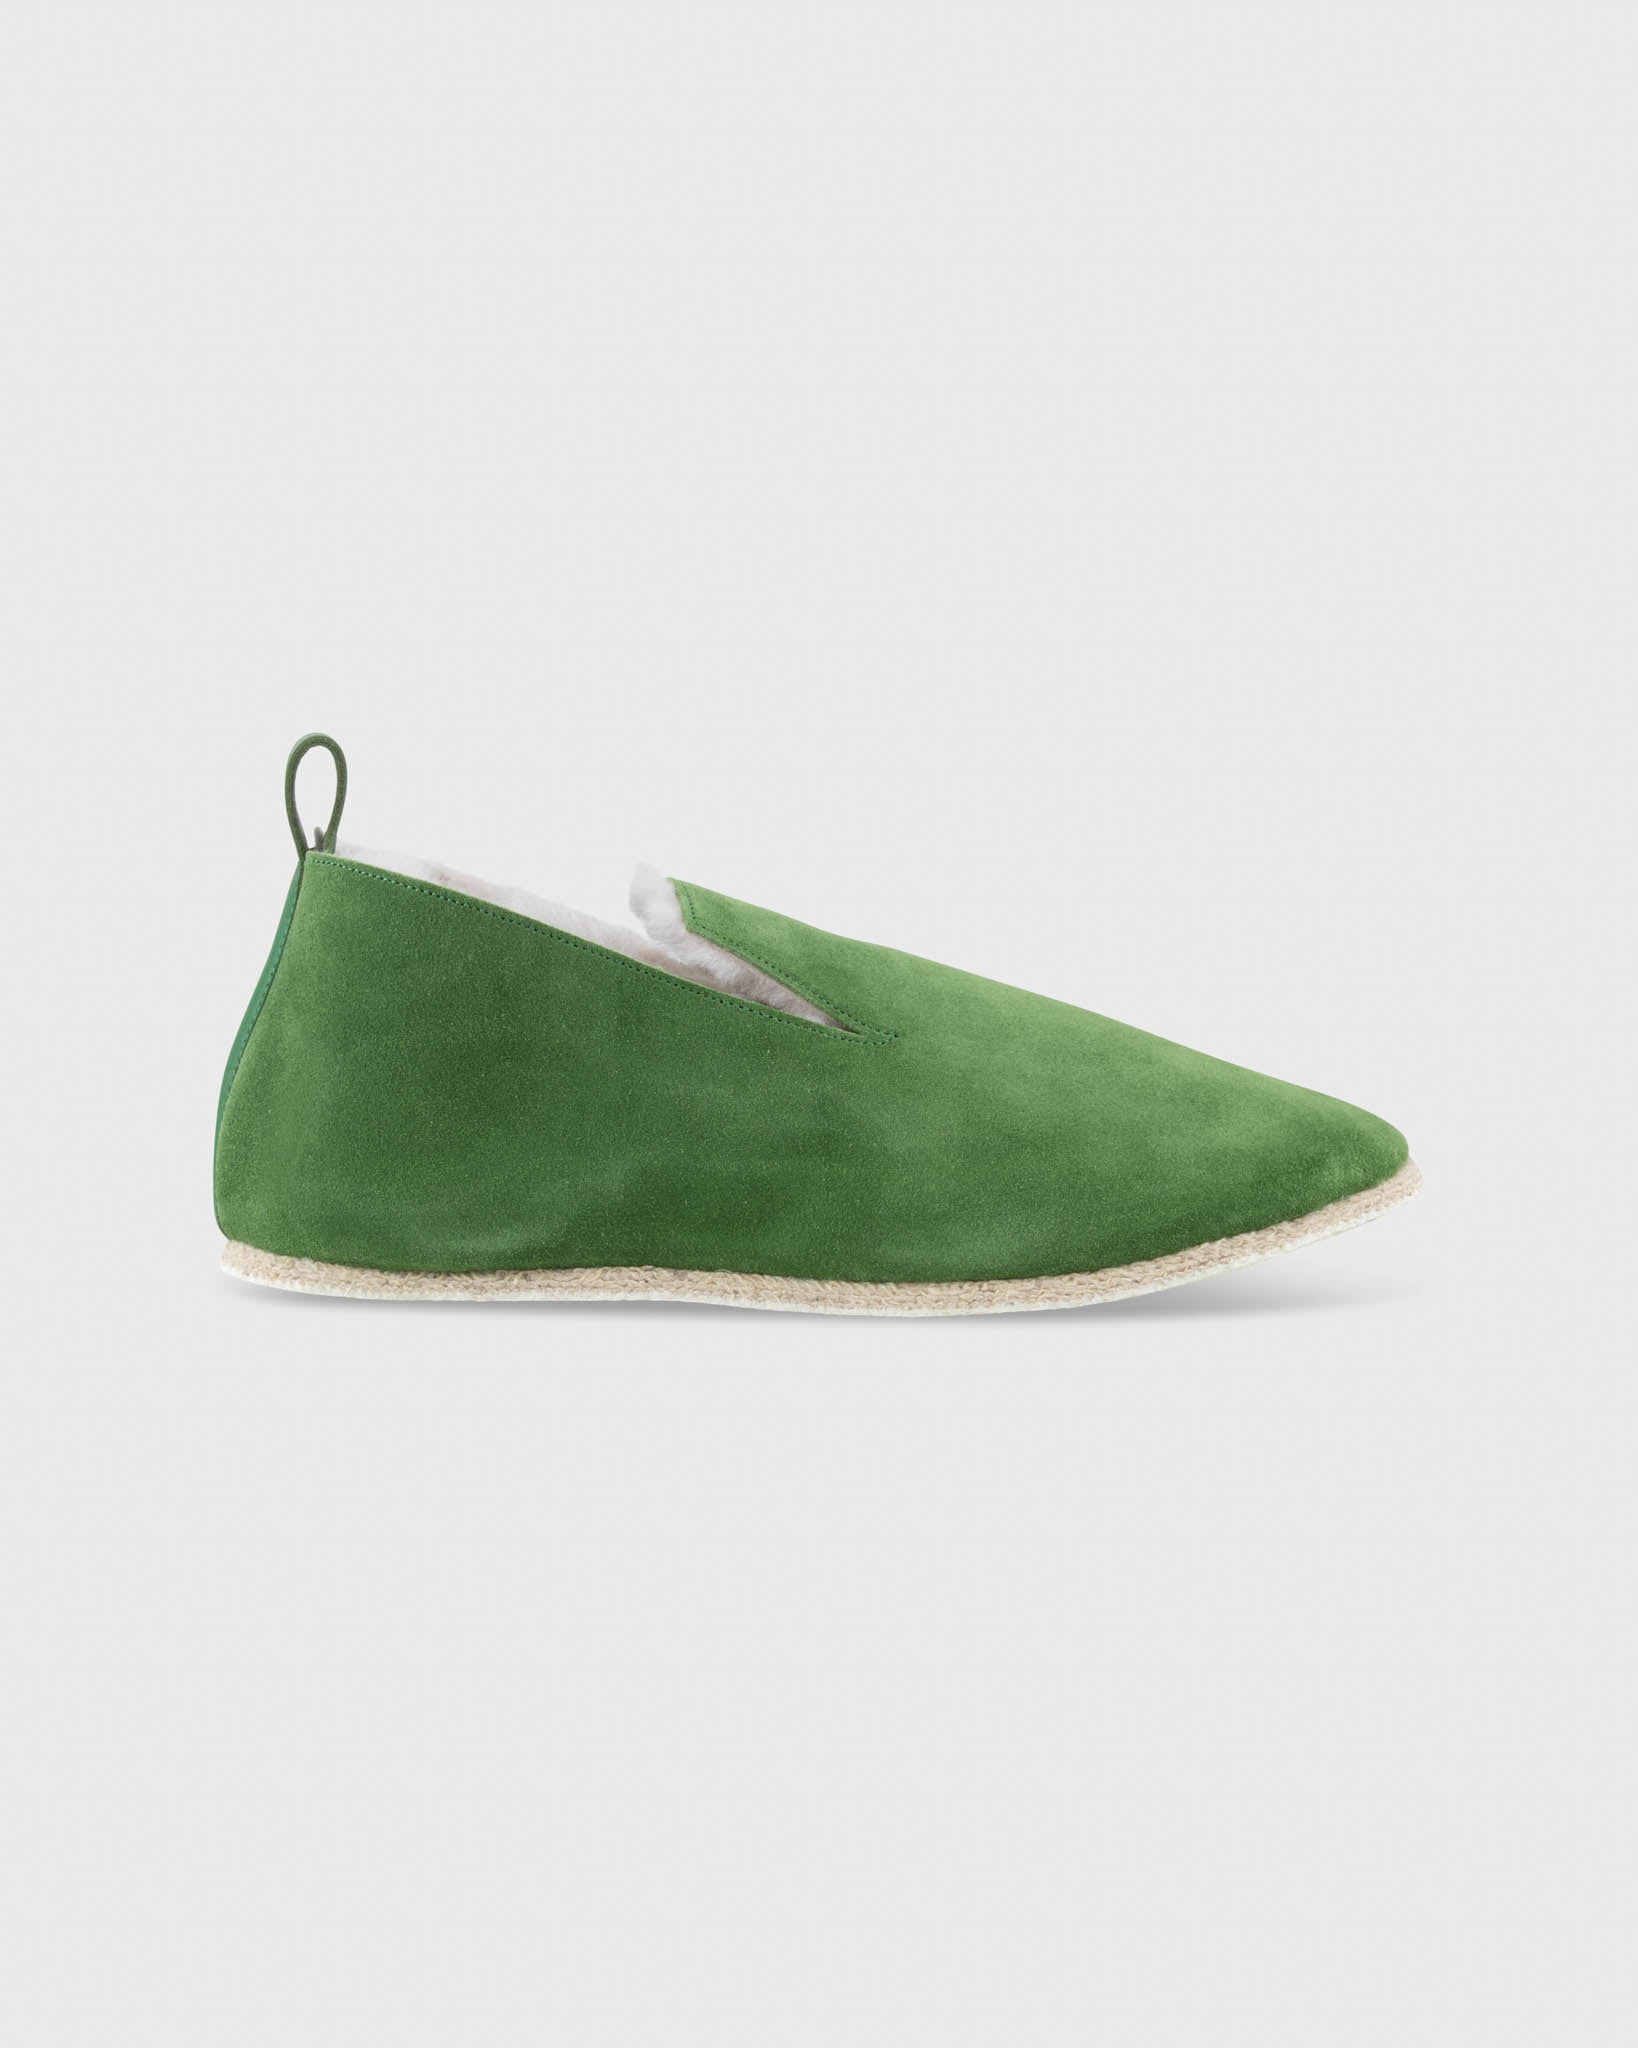 Men's House Slippers in Moss Suede